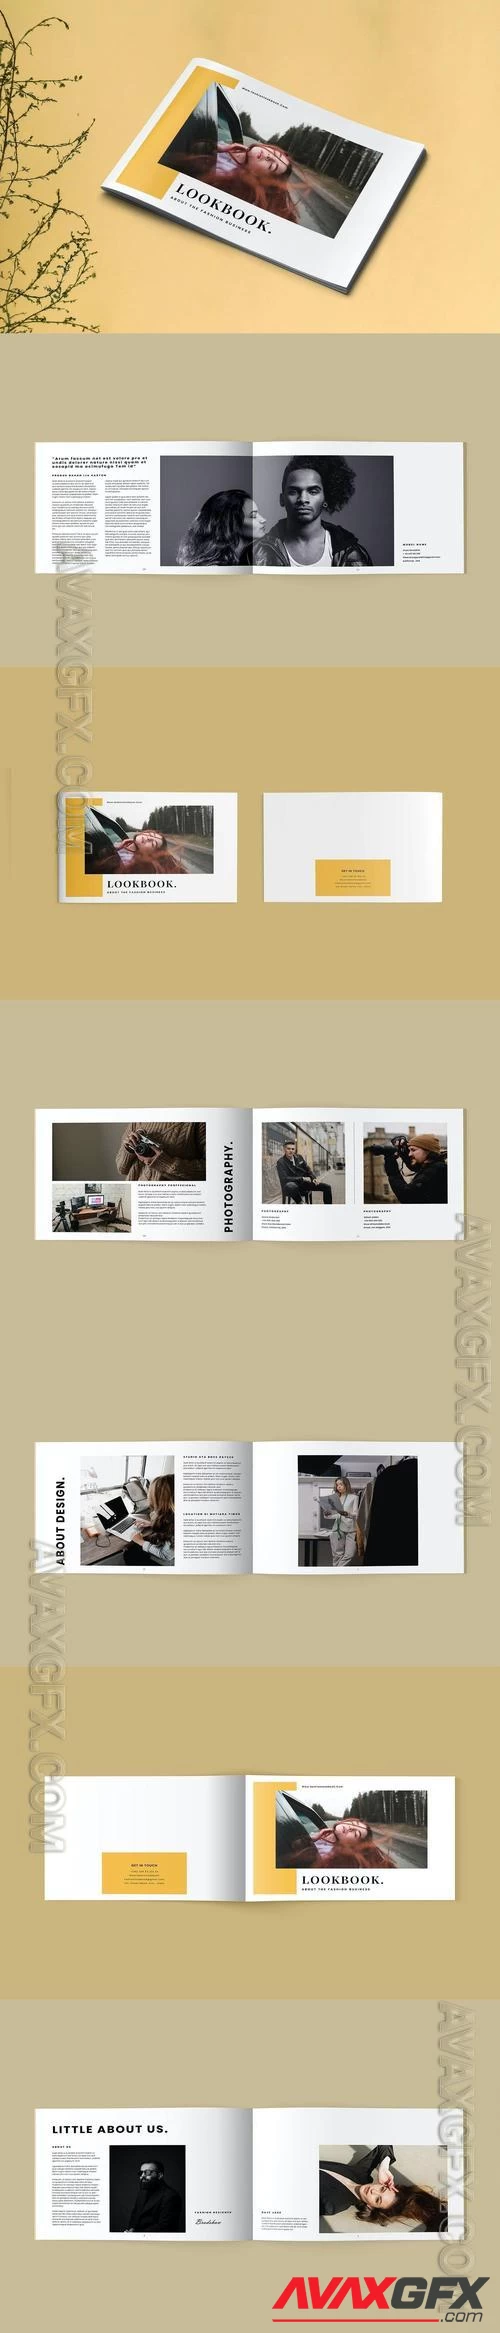 32 Pages Fashion Lookbook